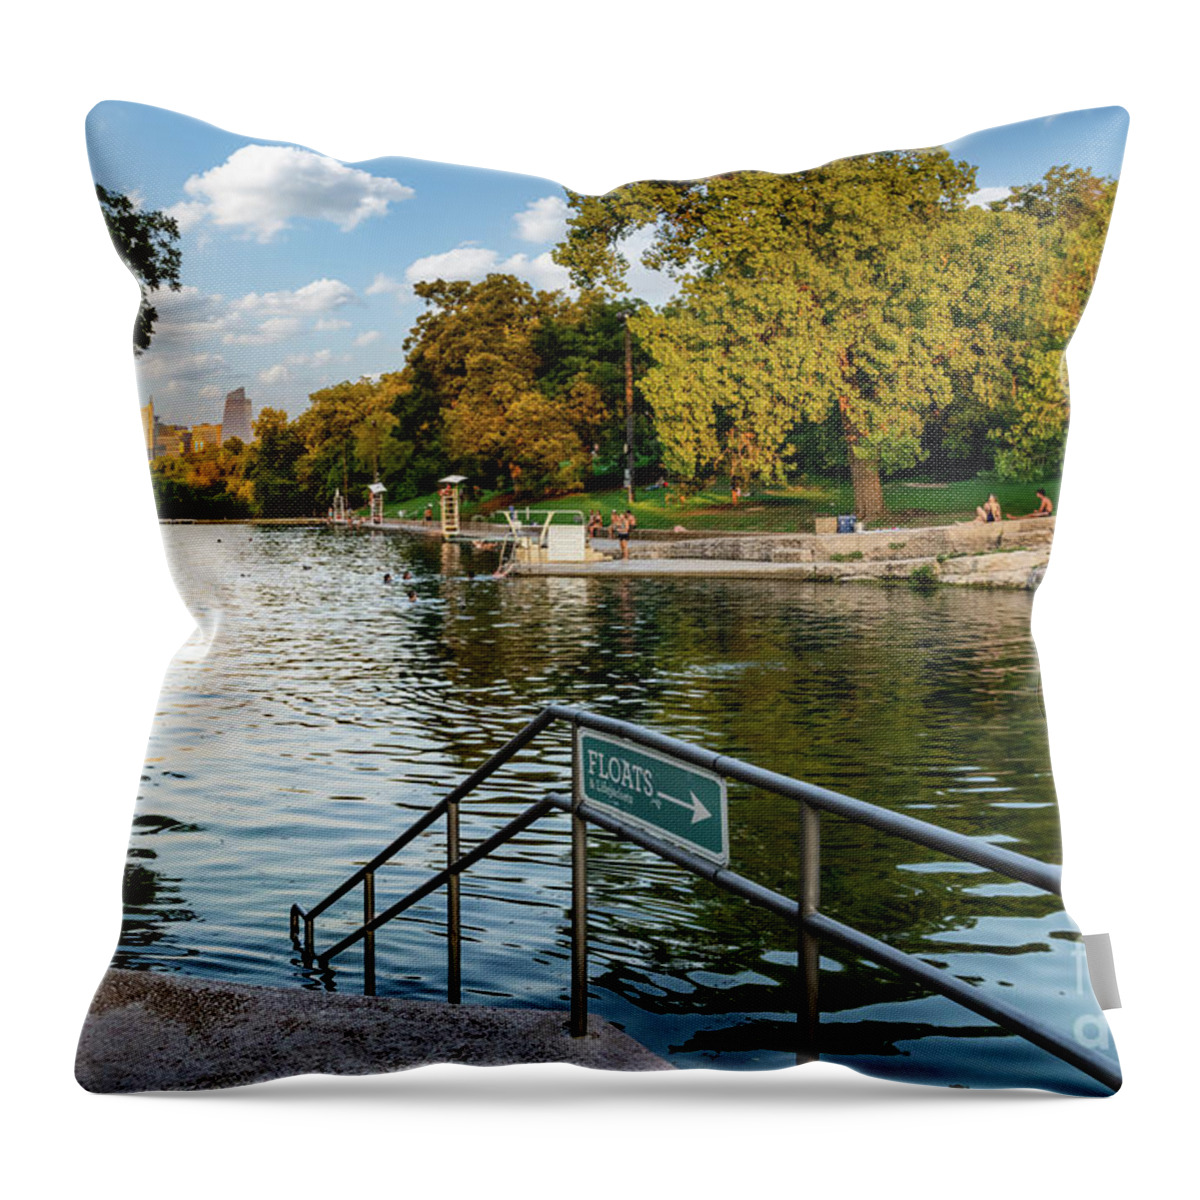 Barton Springs Pool Throw Pillow featuring the photograph Barton Springs Pool 2 by Bee Creek Photography - Tod and Cynthia